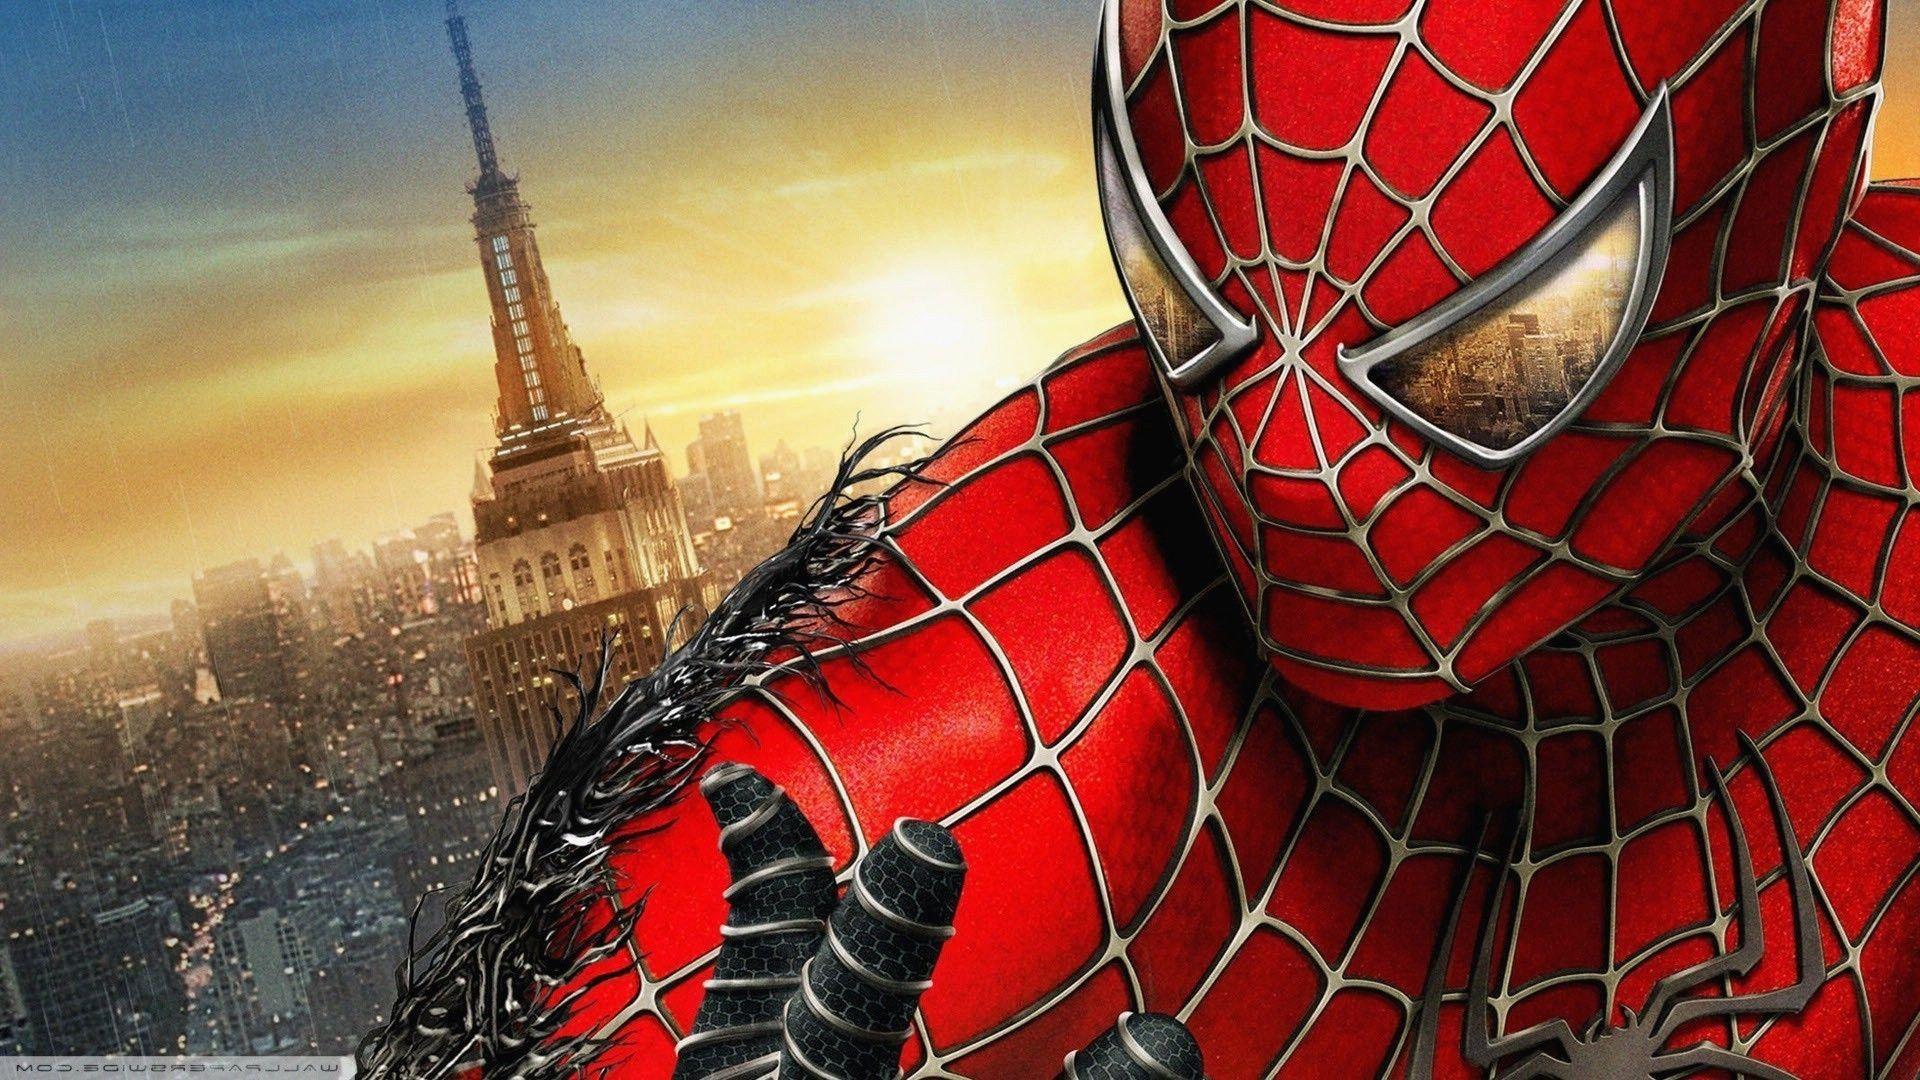 Hd Cave Wallpaper Of the Amazing Spider Man Best Of Spider Man 3